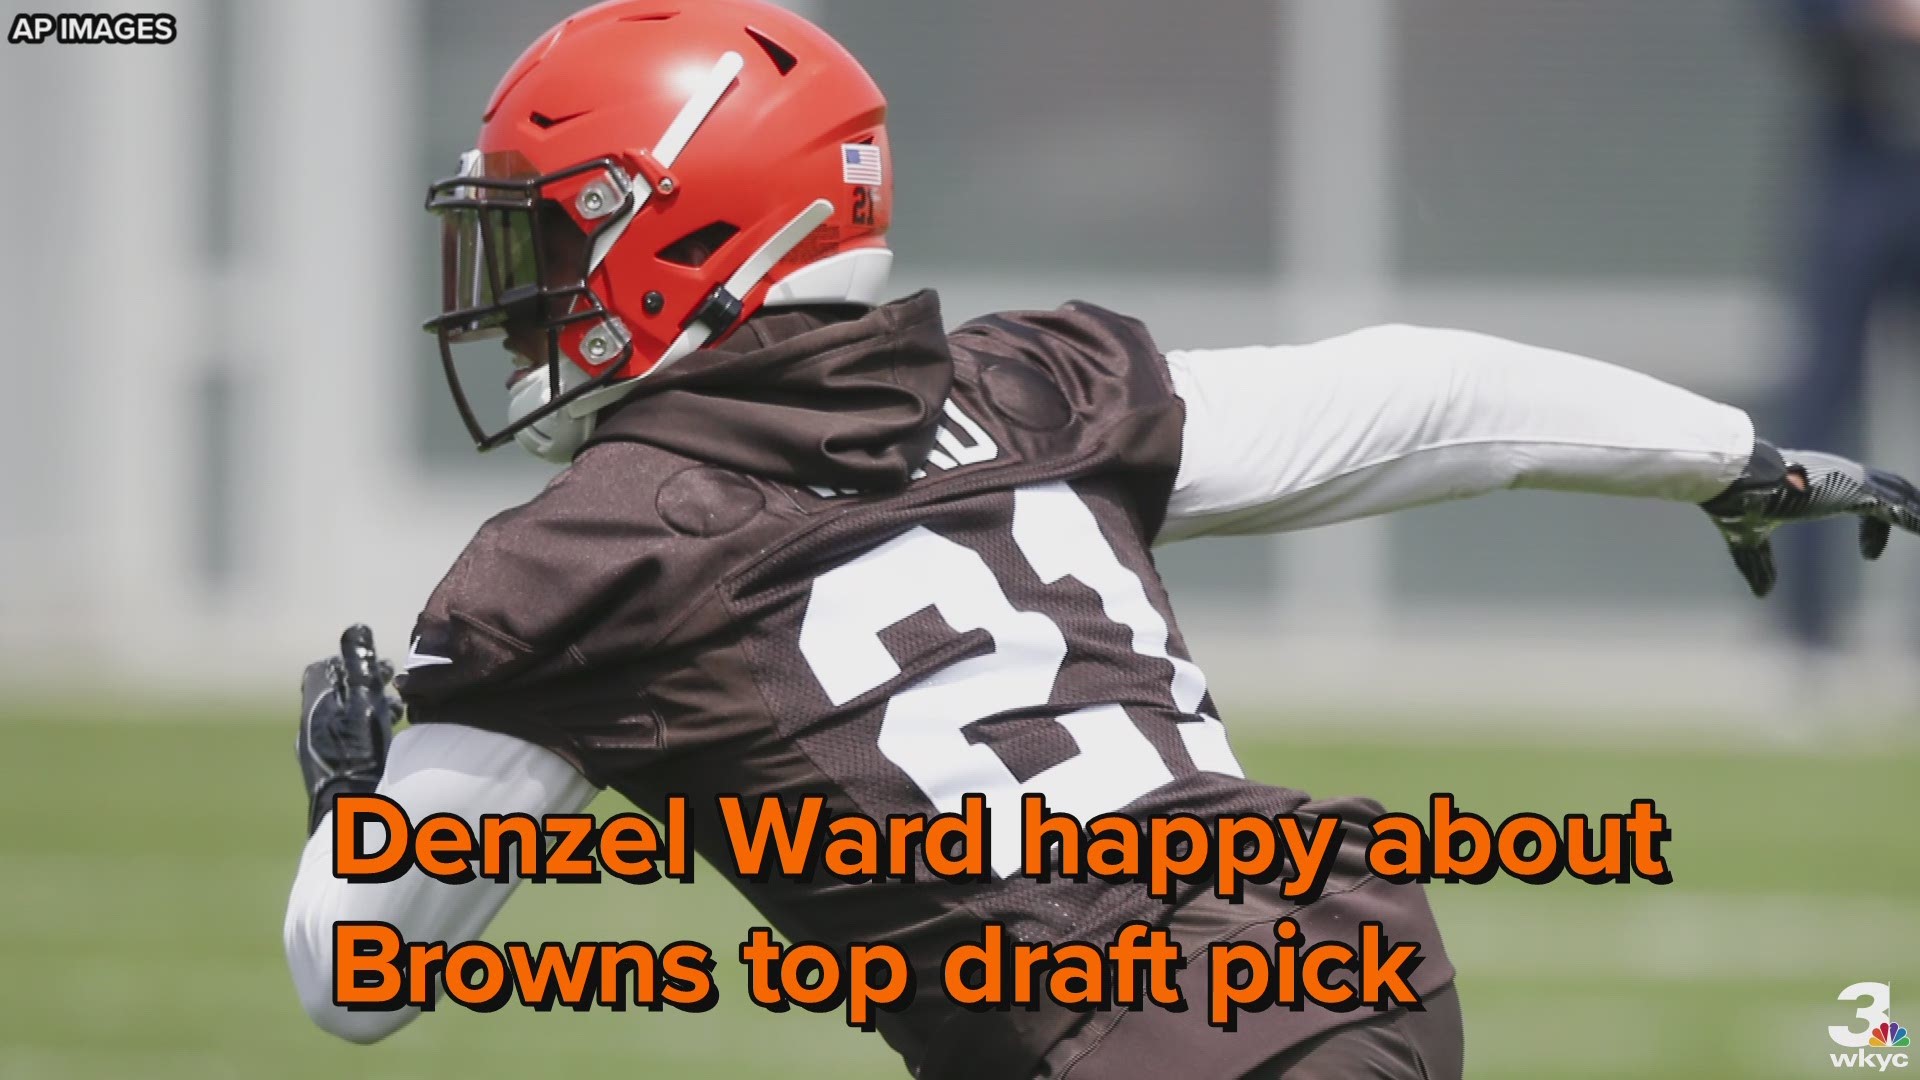 Second-year standout Denzel Ward is ‘real excited’ about teaming with Cleveland Browns rookie cornerback Greedy Williams.